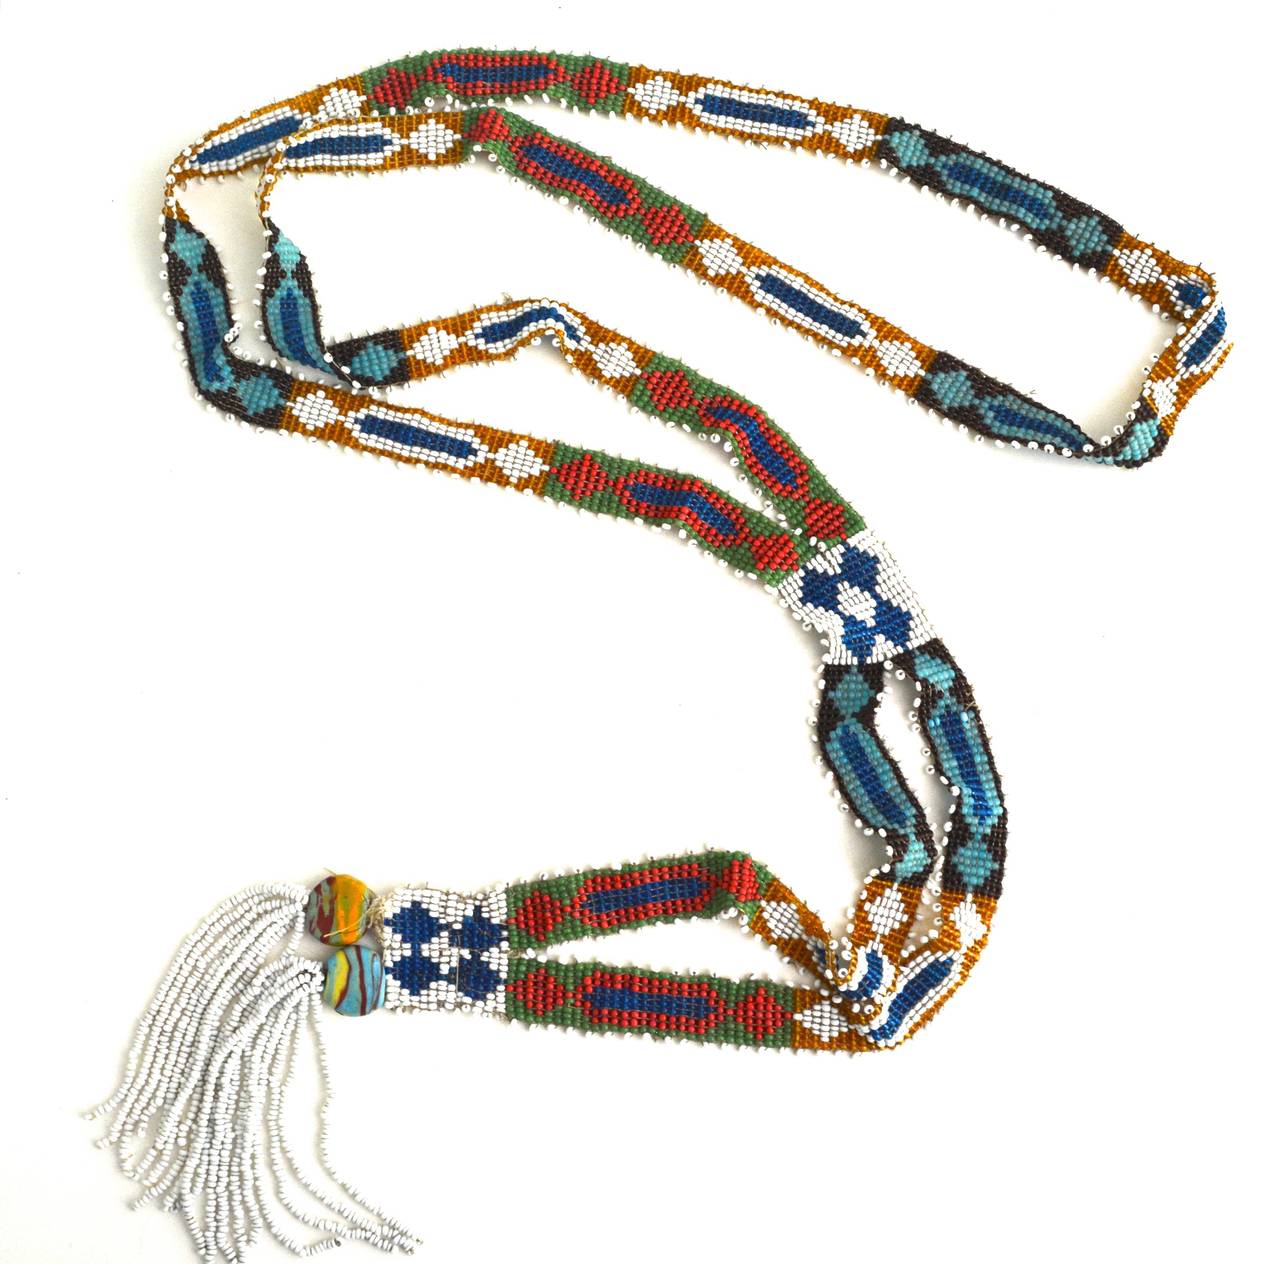 Vintage loom beaded glass necklace with white fringe, unsigned. The piece celebrates color and is possibly of Native American origin. Style and materials suggests a 1920s date. Trade beads at the bottom display color and some age. Strong and